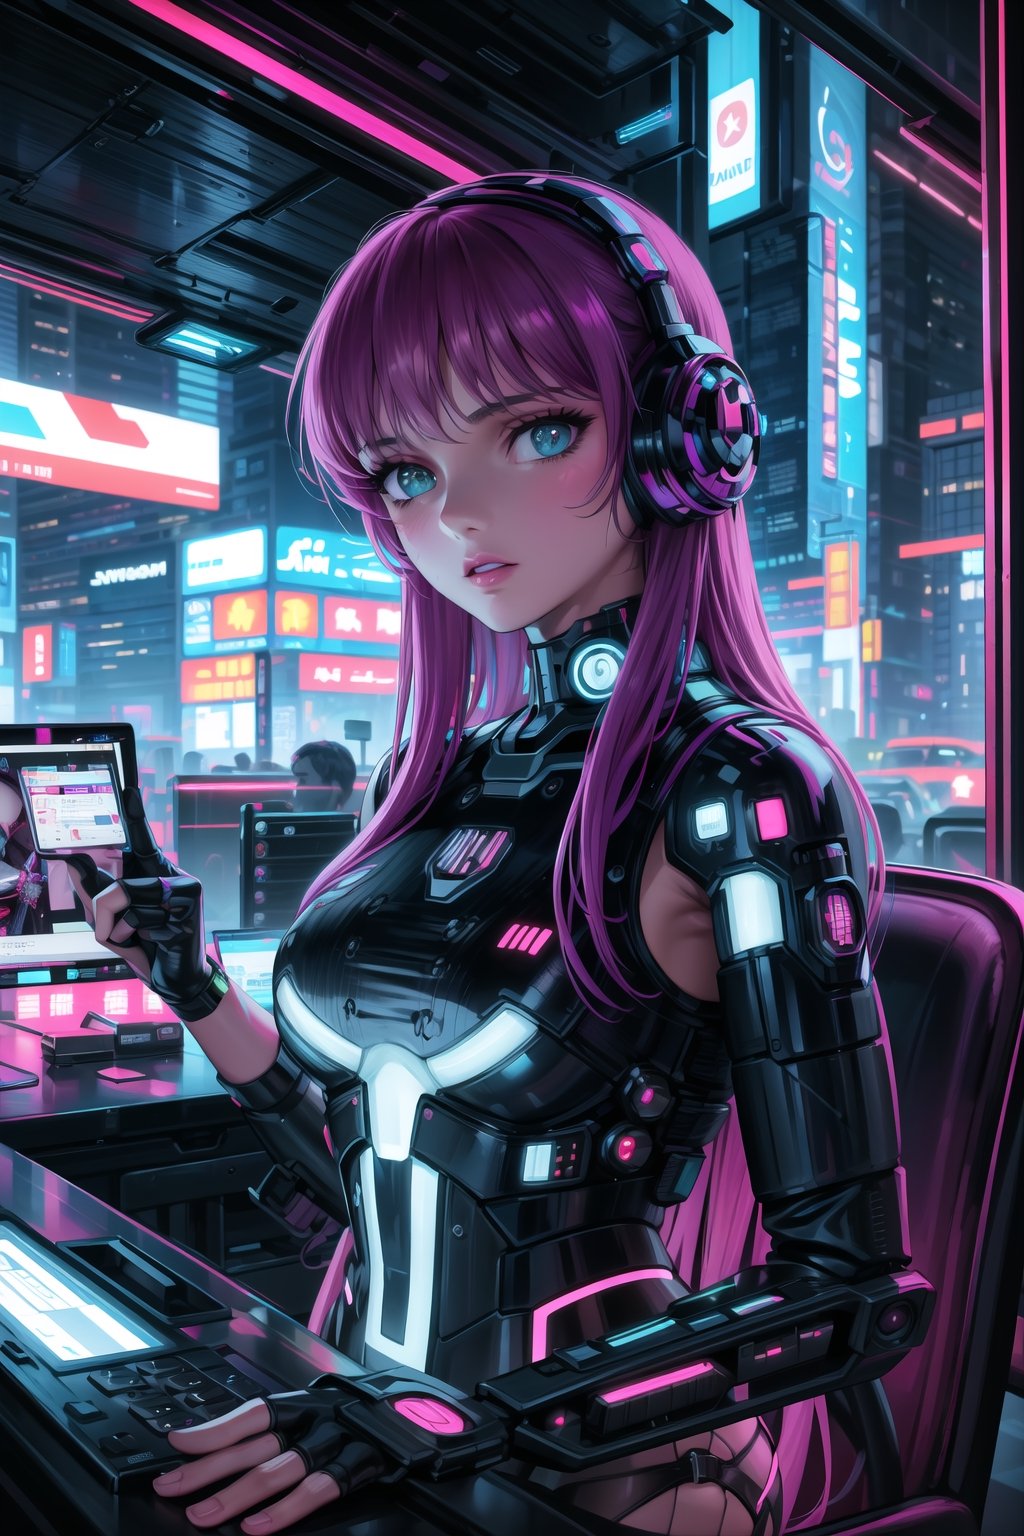 masterpiece,best quality,highres,ultra-detailed,purple hair, long hair, Saori, ((hacker)), ,fishnets ,computer, monitor, wive, cable,(( cyberpunk)), indoors, neon nigth, ((Cyborg)), ((star wars)), chip, cyberpunk, collar, confident and curious gaze, futuristic cyberpunk hacker attire, high-tech bodysuit with glowing circuitry patterns, fingerless gloves underground hacker den, surrounded by screens displaying code and data, typing rapidly on a holographic keyboard, exuding intelligence and tech-savviness, cyberpunk and gritty atmosphere, dark color palette with neon highlights